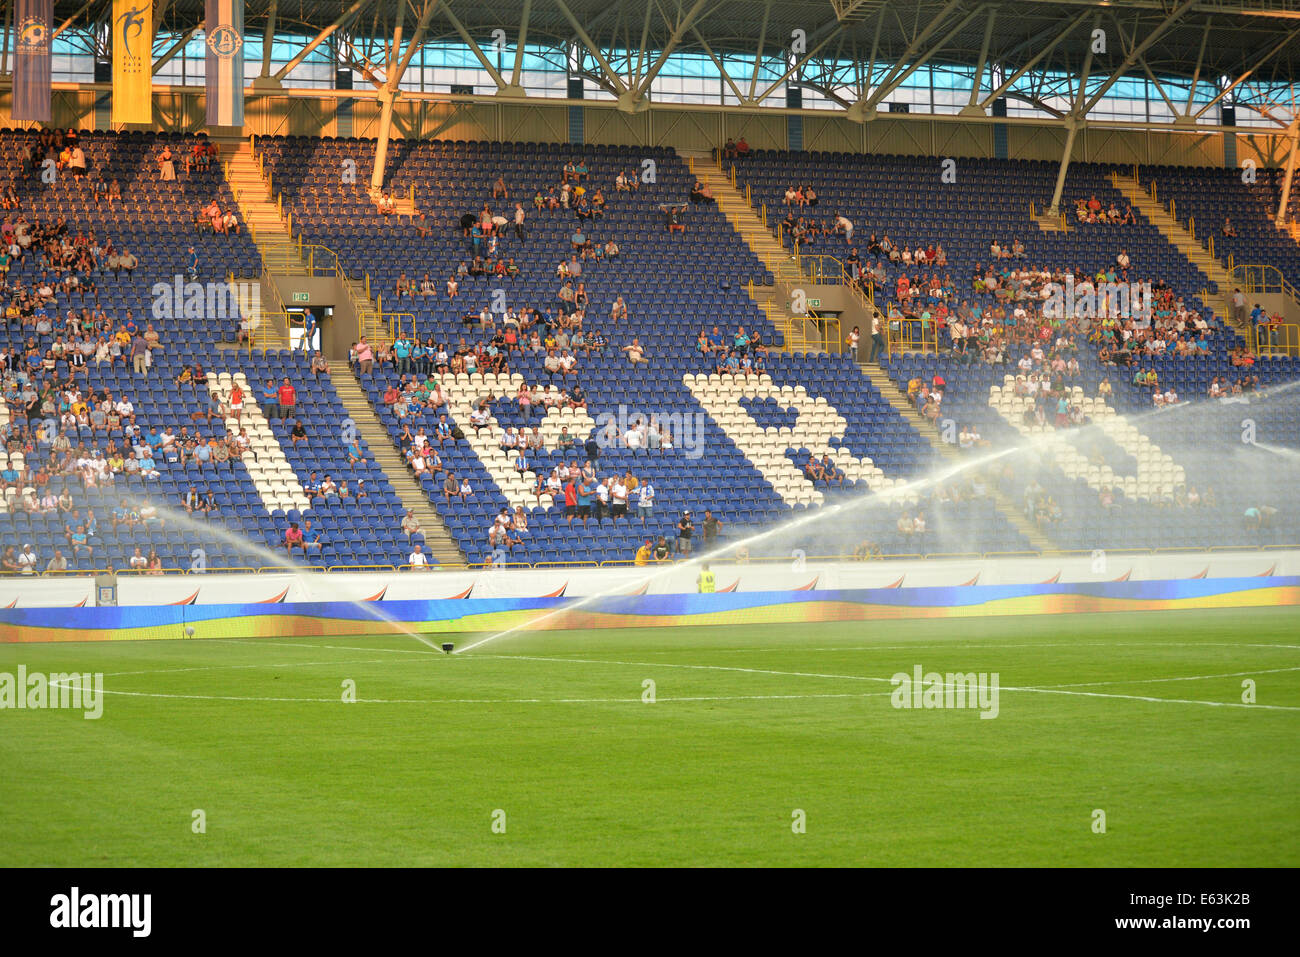 Watering the field during the match between FC Dnipro and FC Karpaty at Stadium Dnipro-Arena, Ukraine Stock Photo